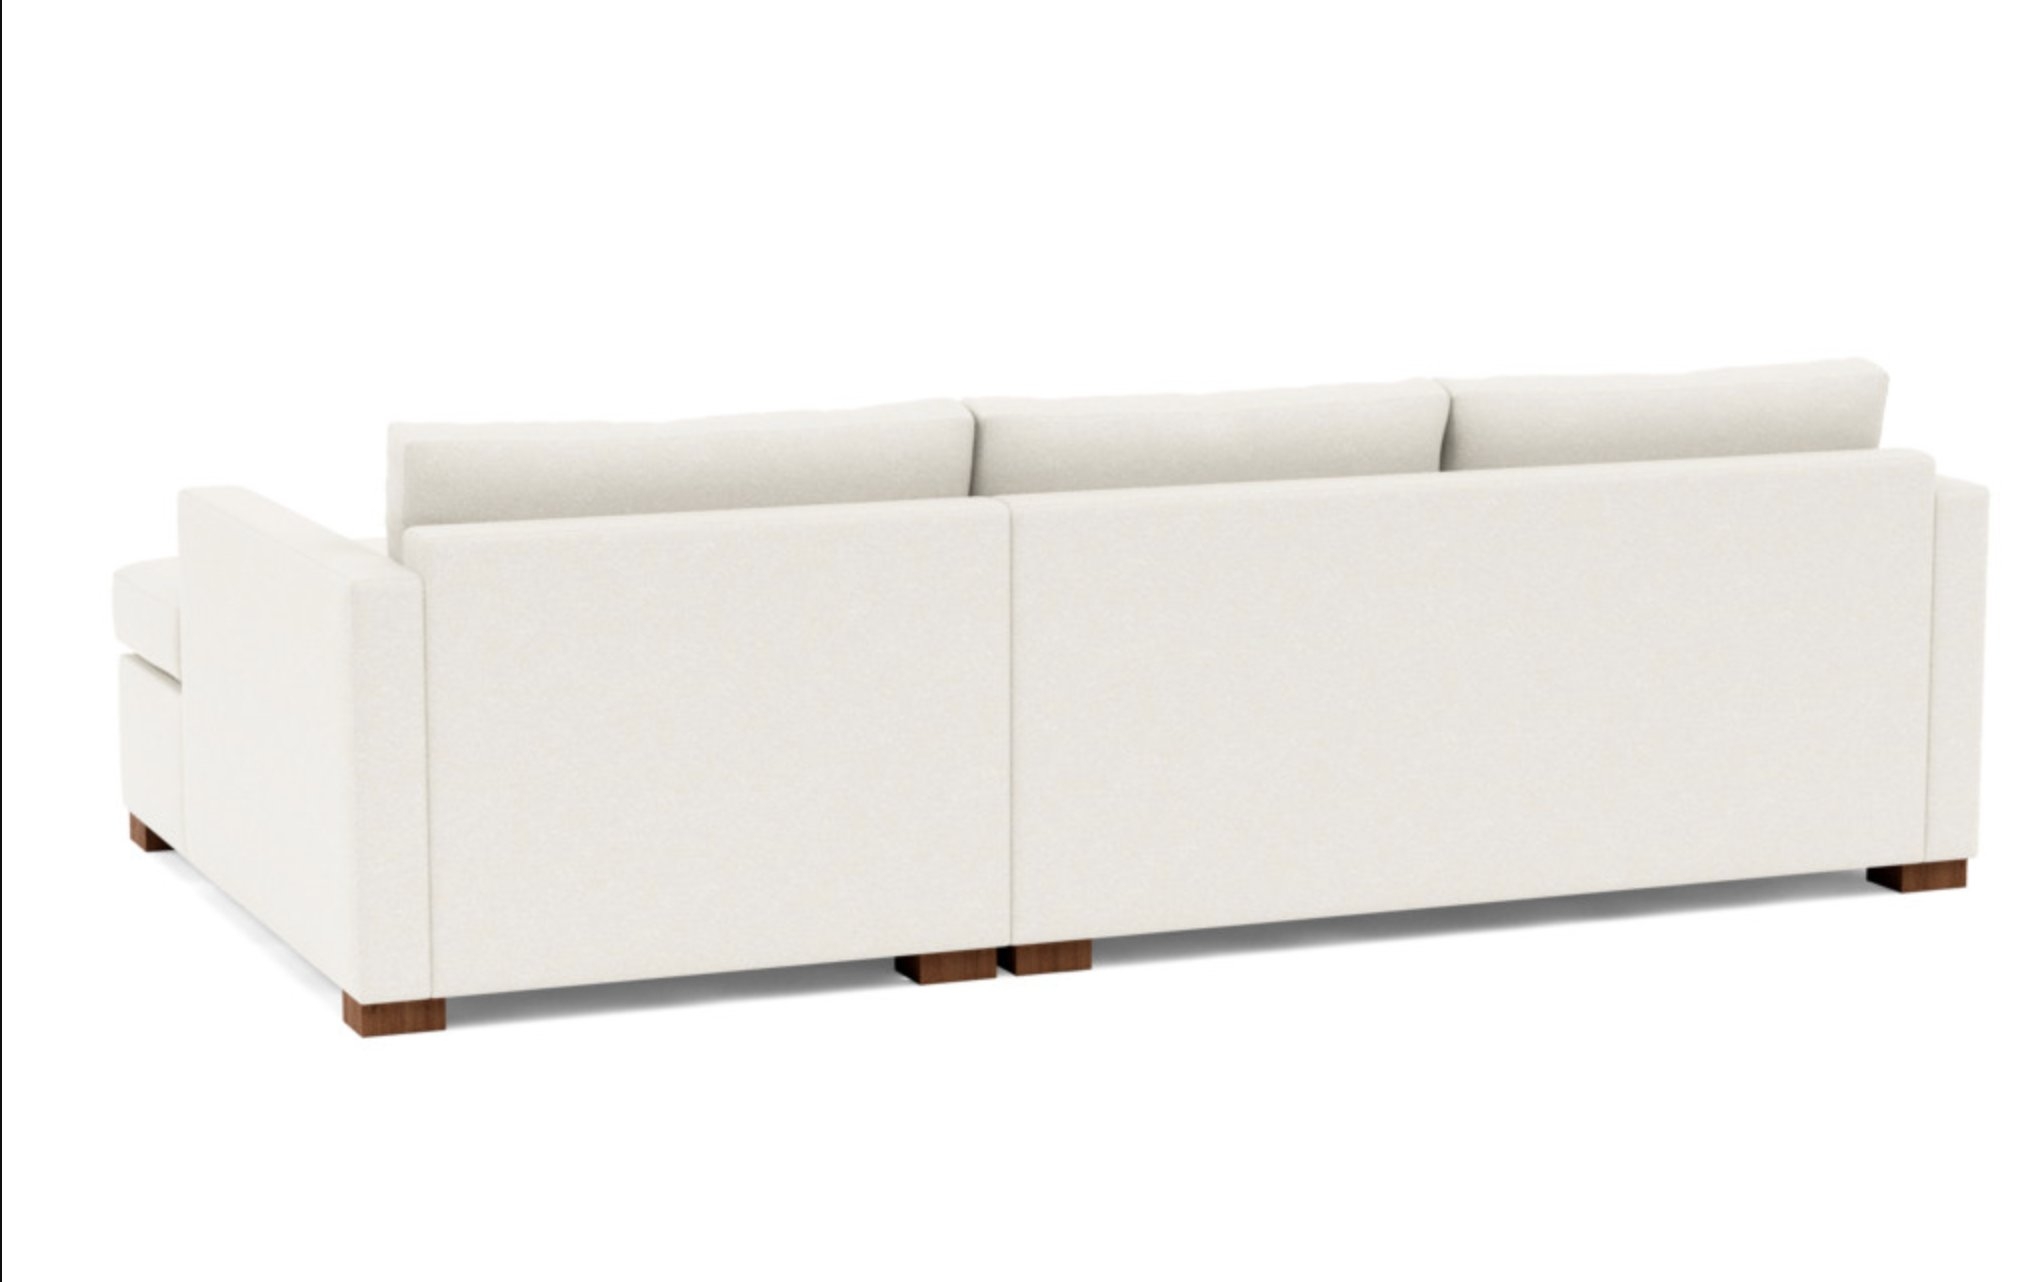 Charly Right Sectional with White Cirrus Fabric and Oiled Walnut legs - Image 2